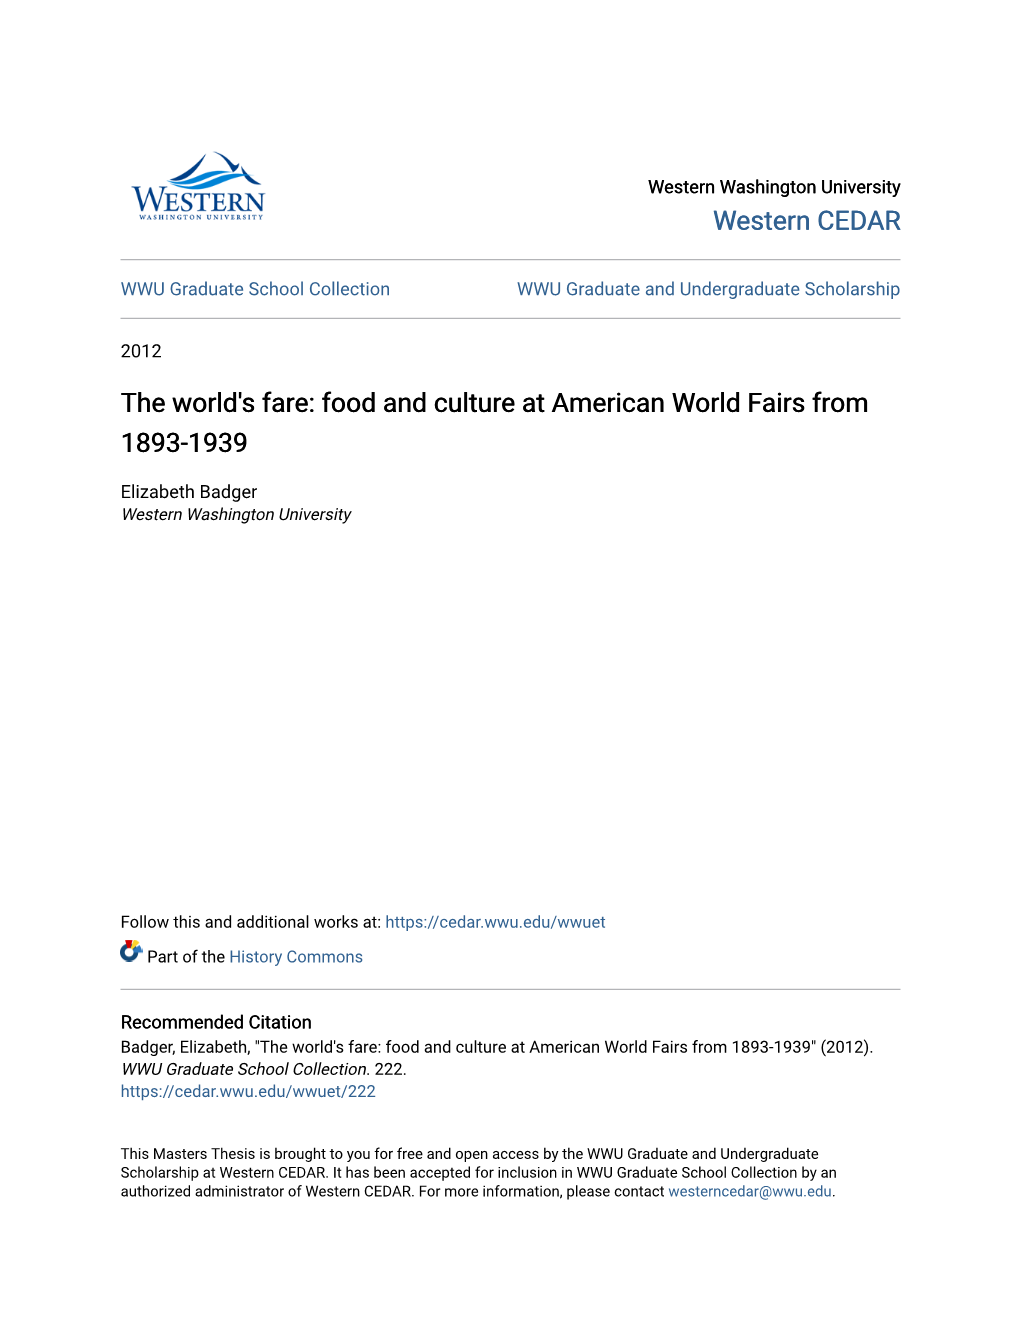 Food and Culture at American World Fairs from 1893-1939